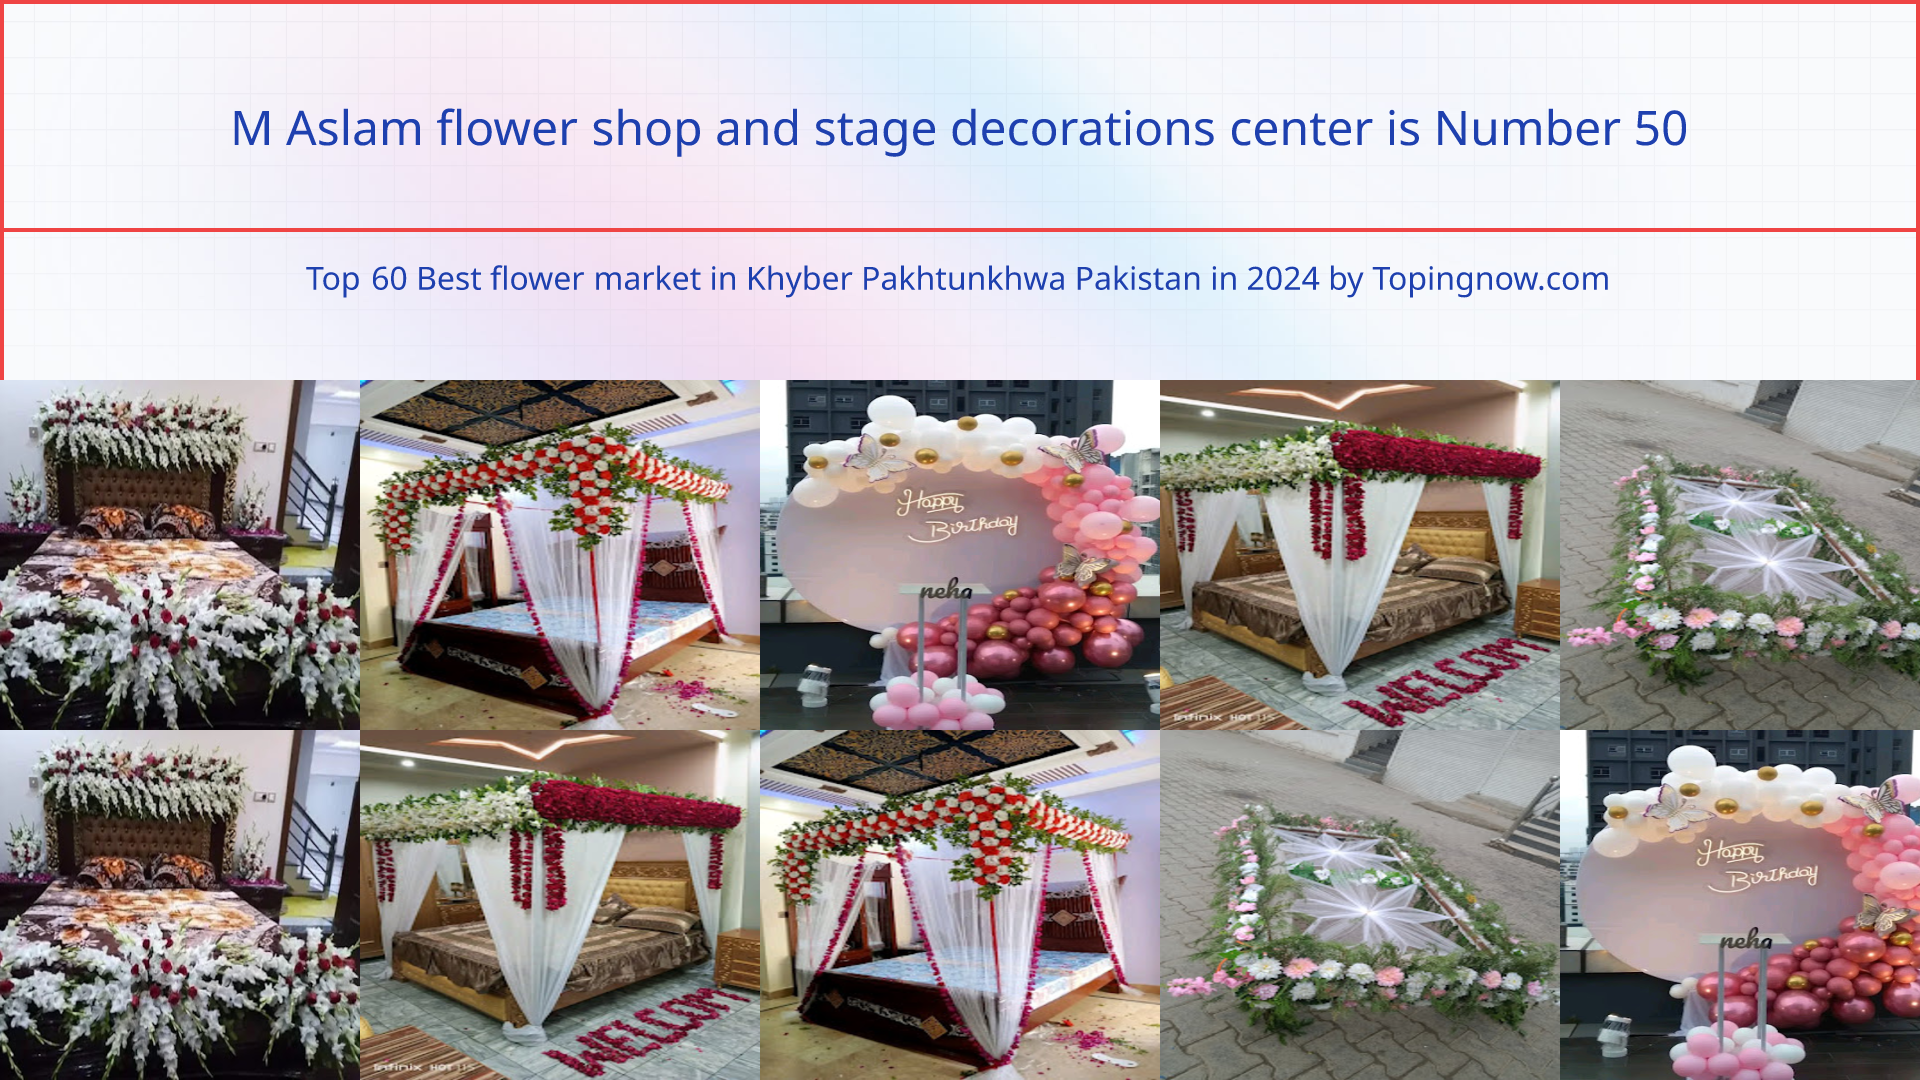 M Aslam flower shop and stage decorations center: Top 60 Best flower market in Khyber Pakhtunkhwa Pakistan in 2024